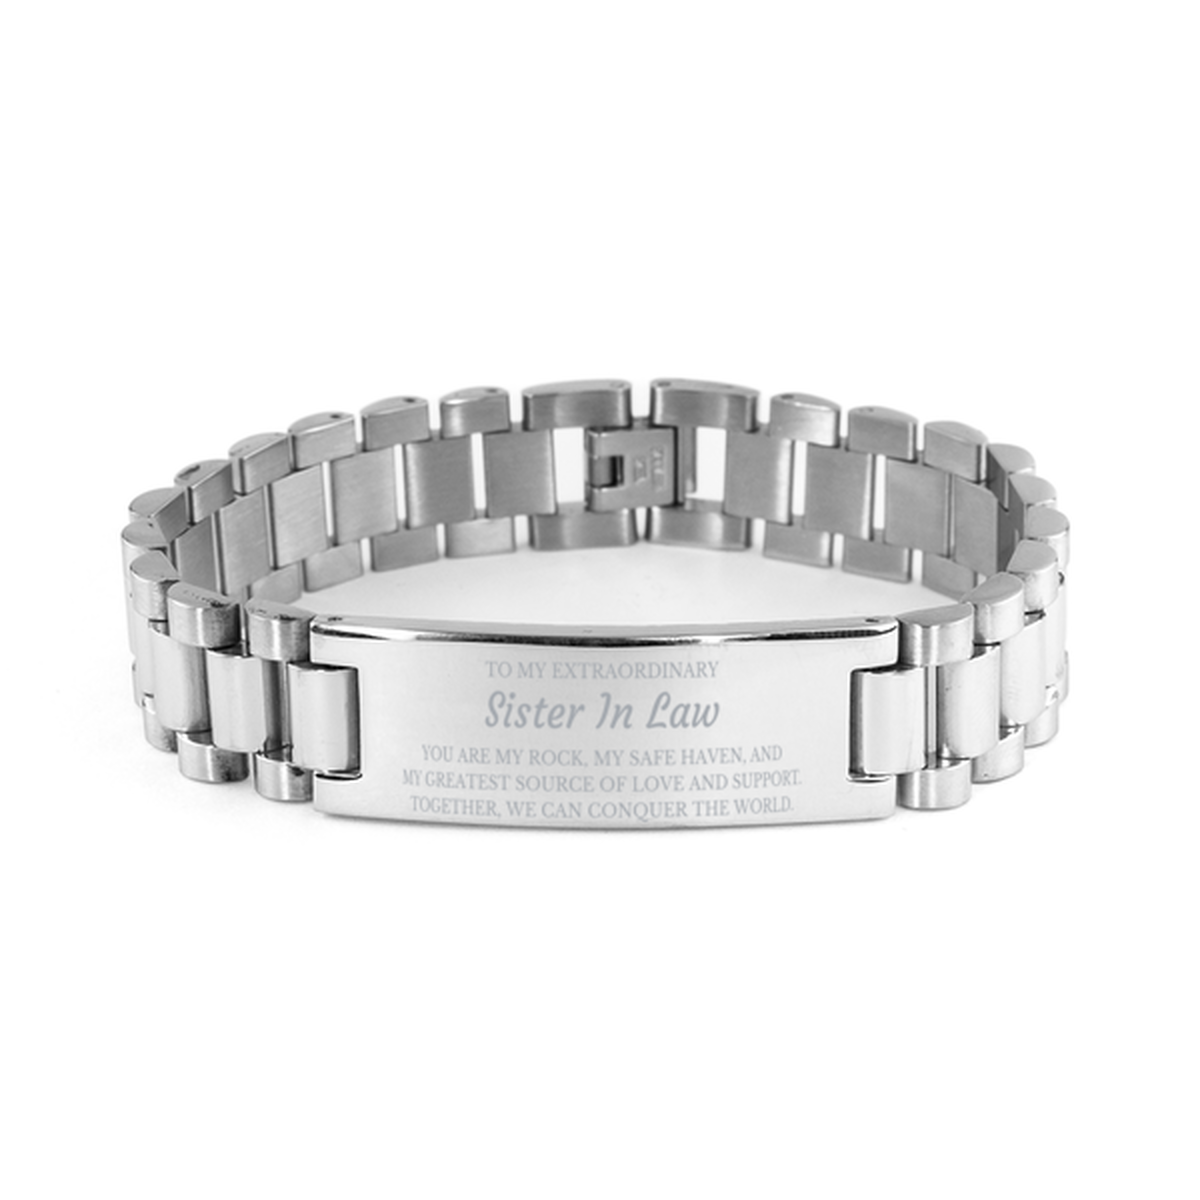 To My Extraordinary Sister In Law Gifts, Together, we can conquer the world, Birthday Ladder Stainless Steel Bracelet For Sister In Law, Christmas Gifts For Sister In Law